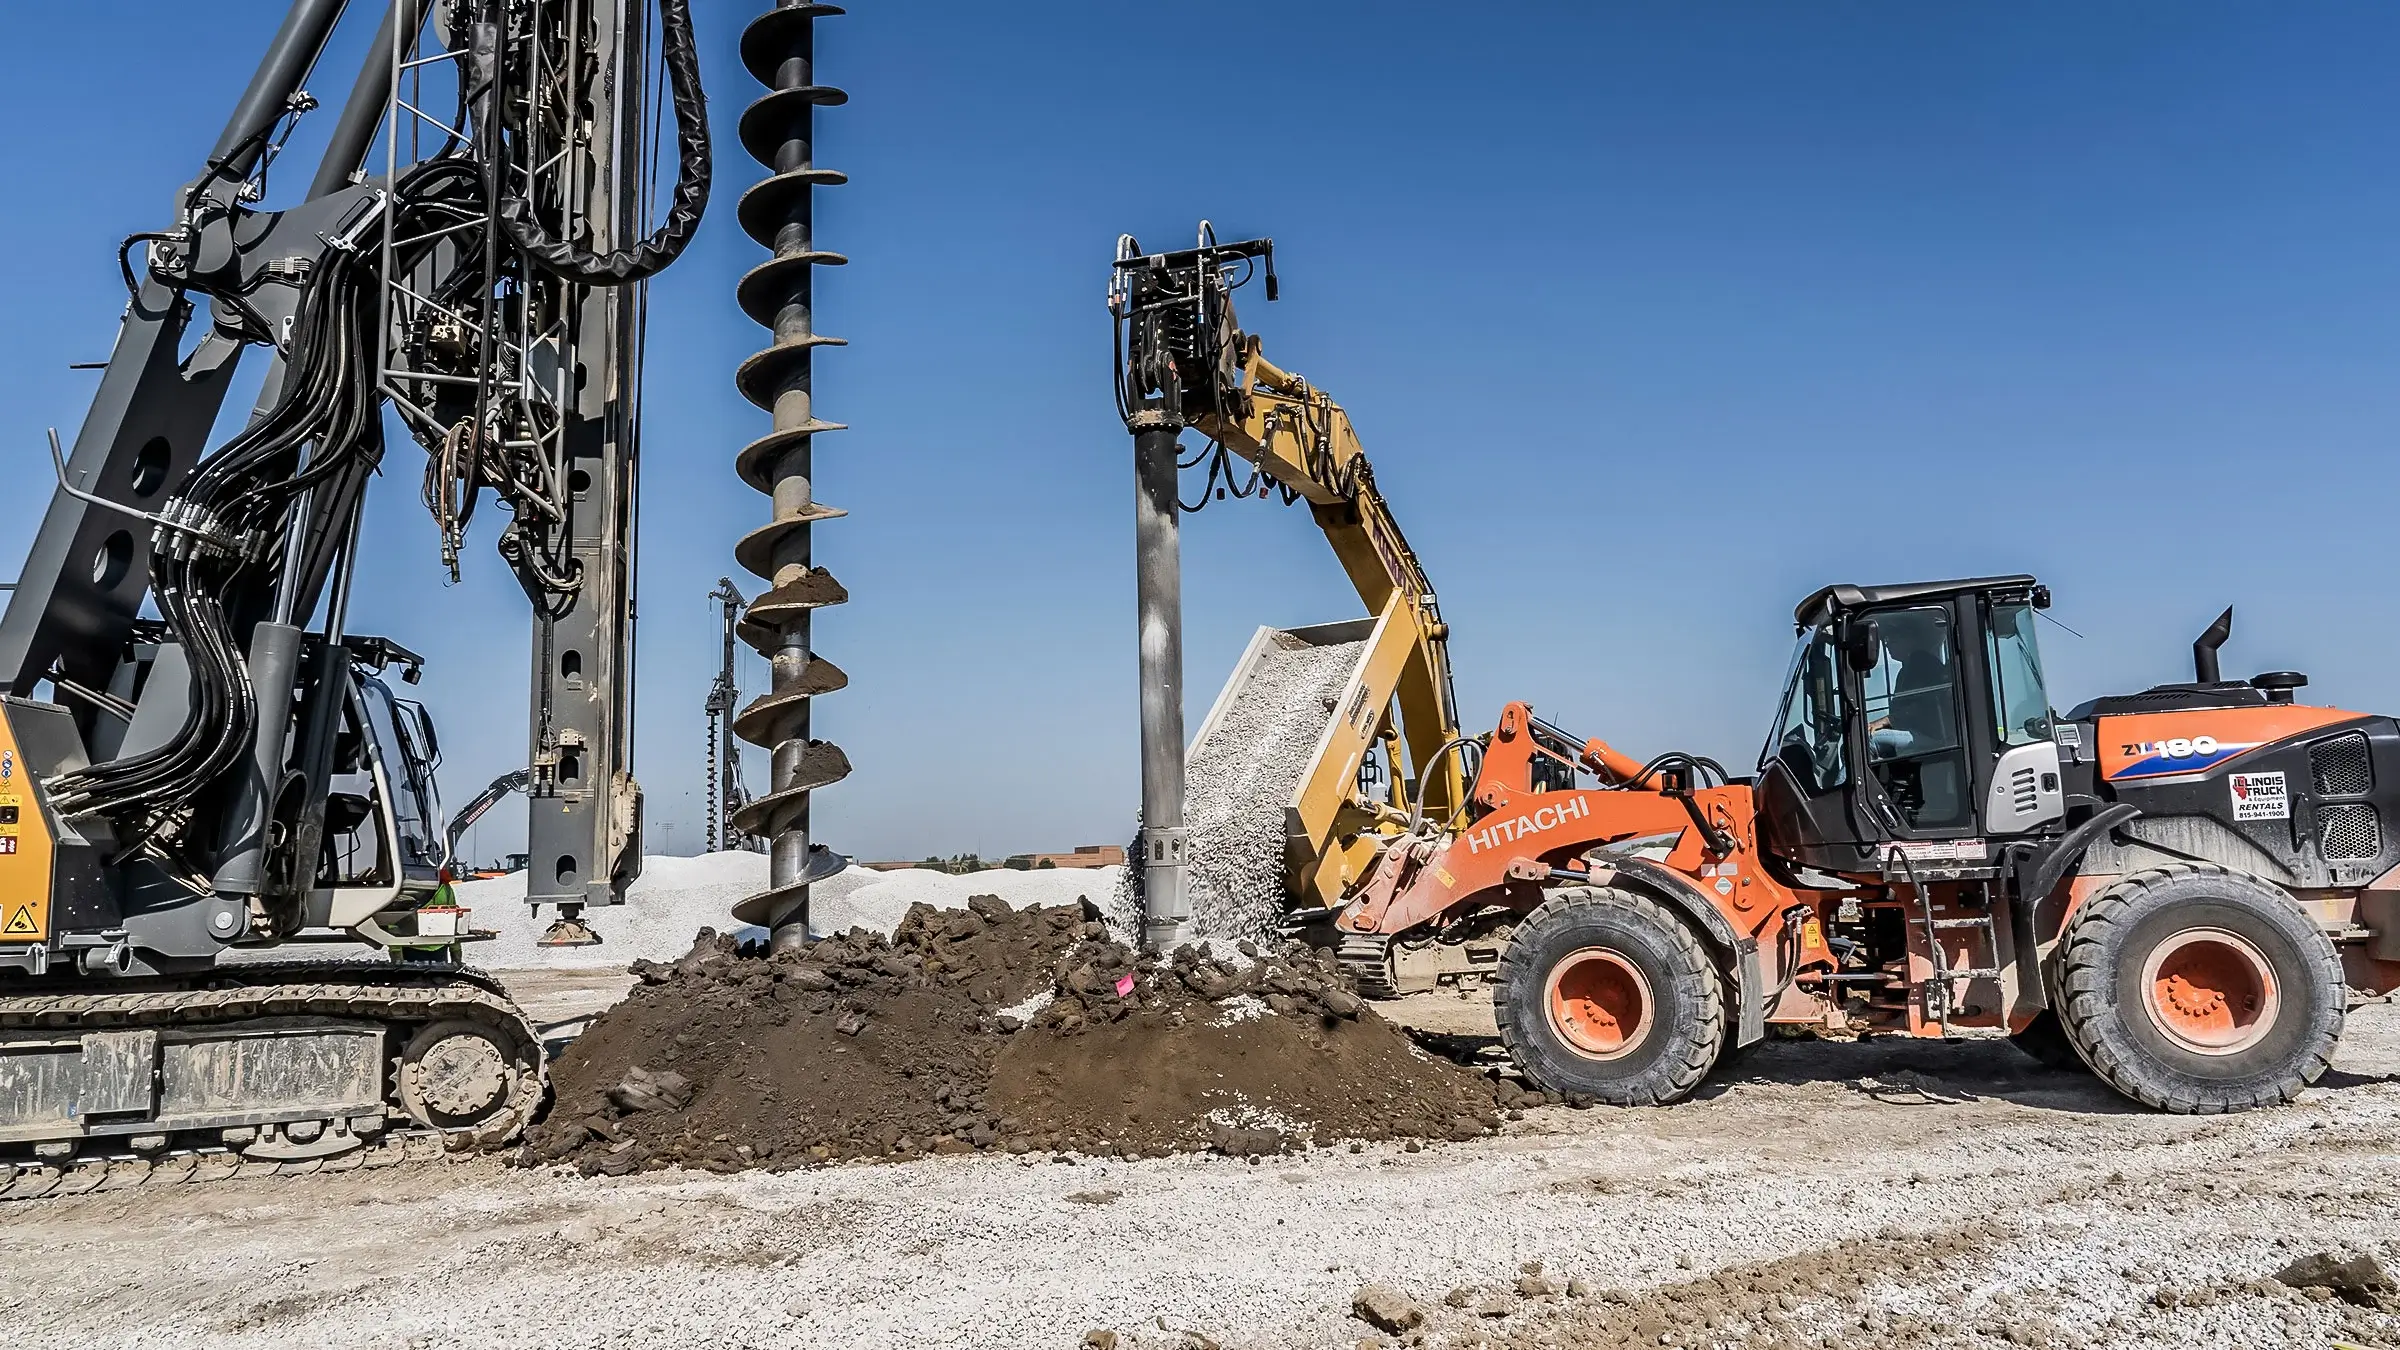 A drill rig, backhoe, and excavator all work at the same spot on a foundation